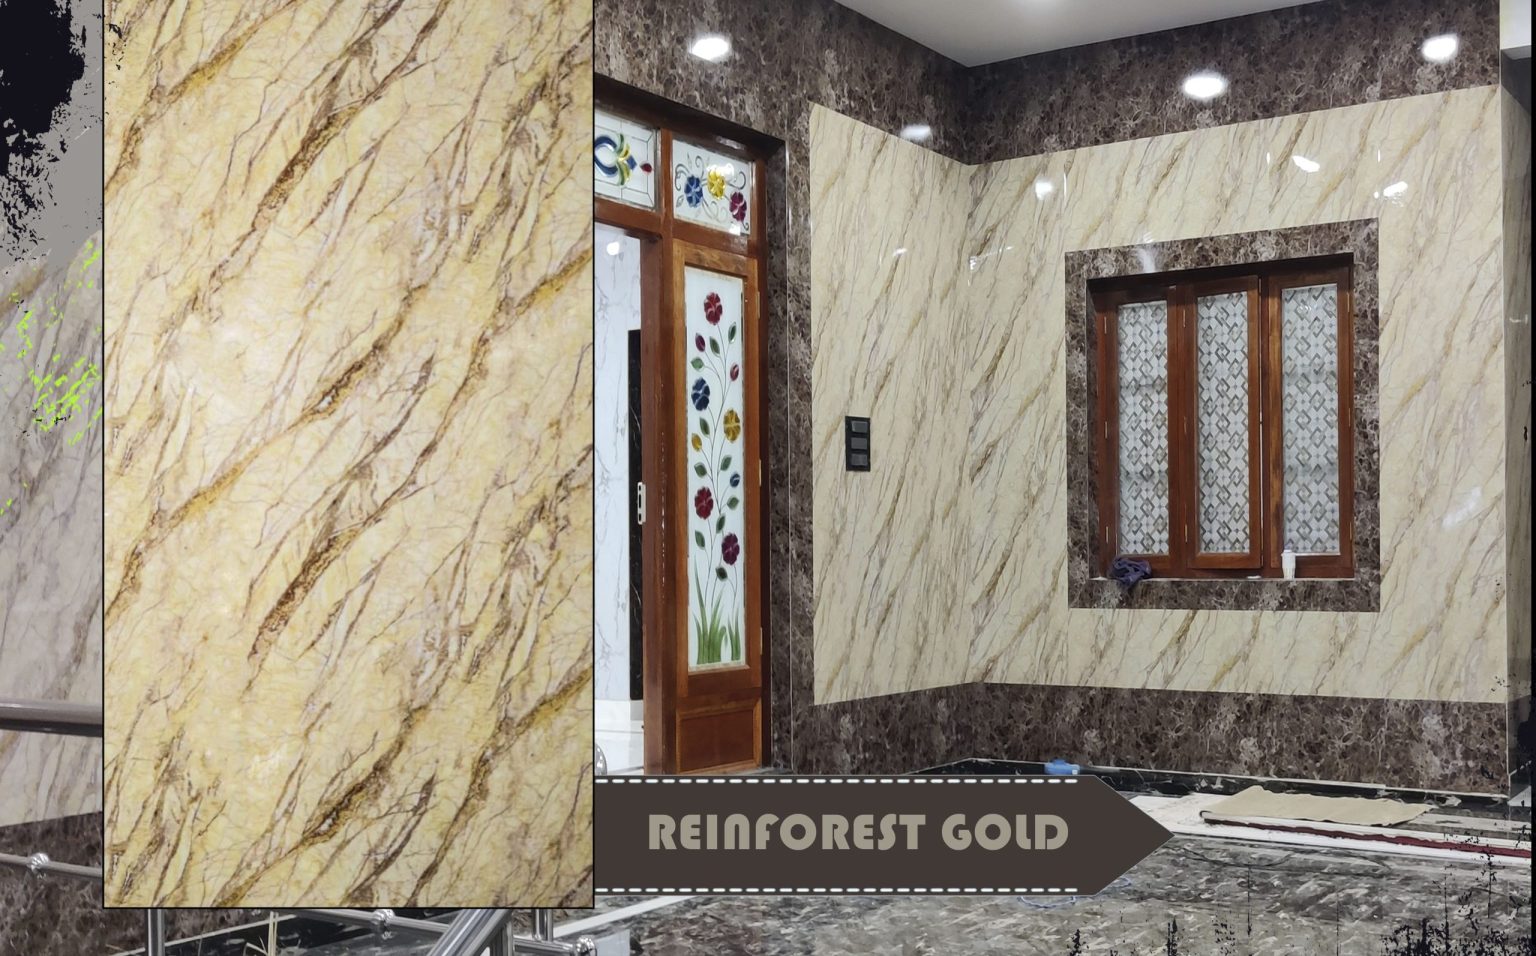 rainforest gold polygranite sheets for walls